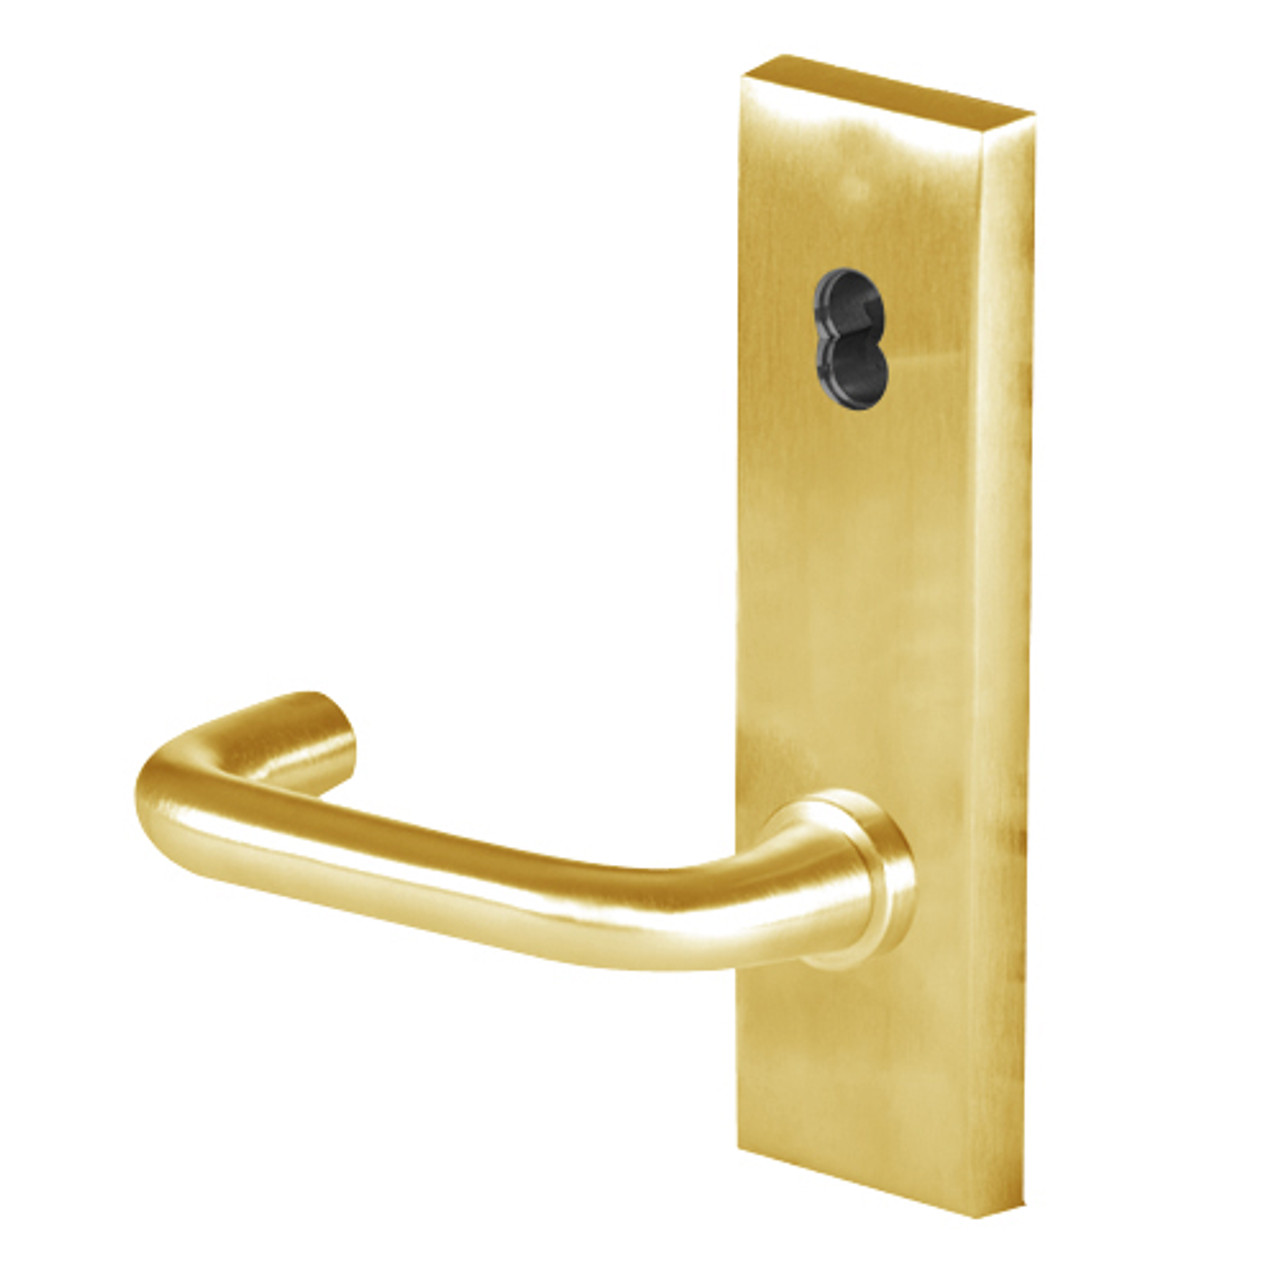 45HW7TWEL3N605 Best 40HW series Double Key Deadbolt Fail Safe Electromechanical Mortise Lever Lock with Solid Tube w/ Return Style in Bright Brass